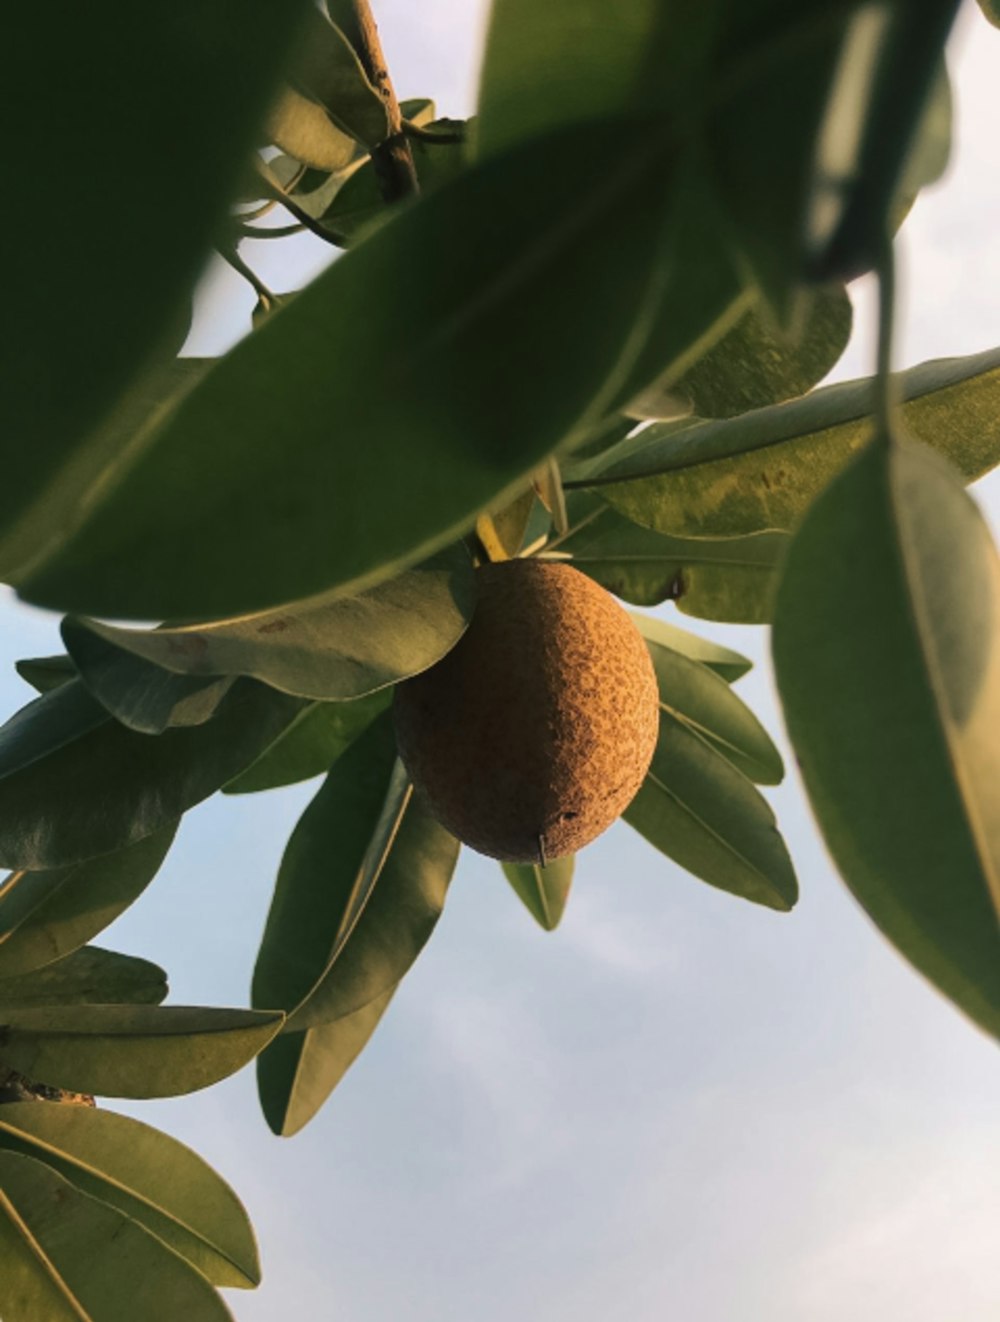 a fruit hanging from a tree branch with sky in the background